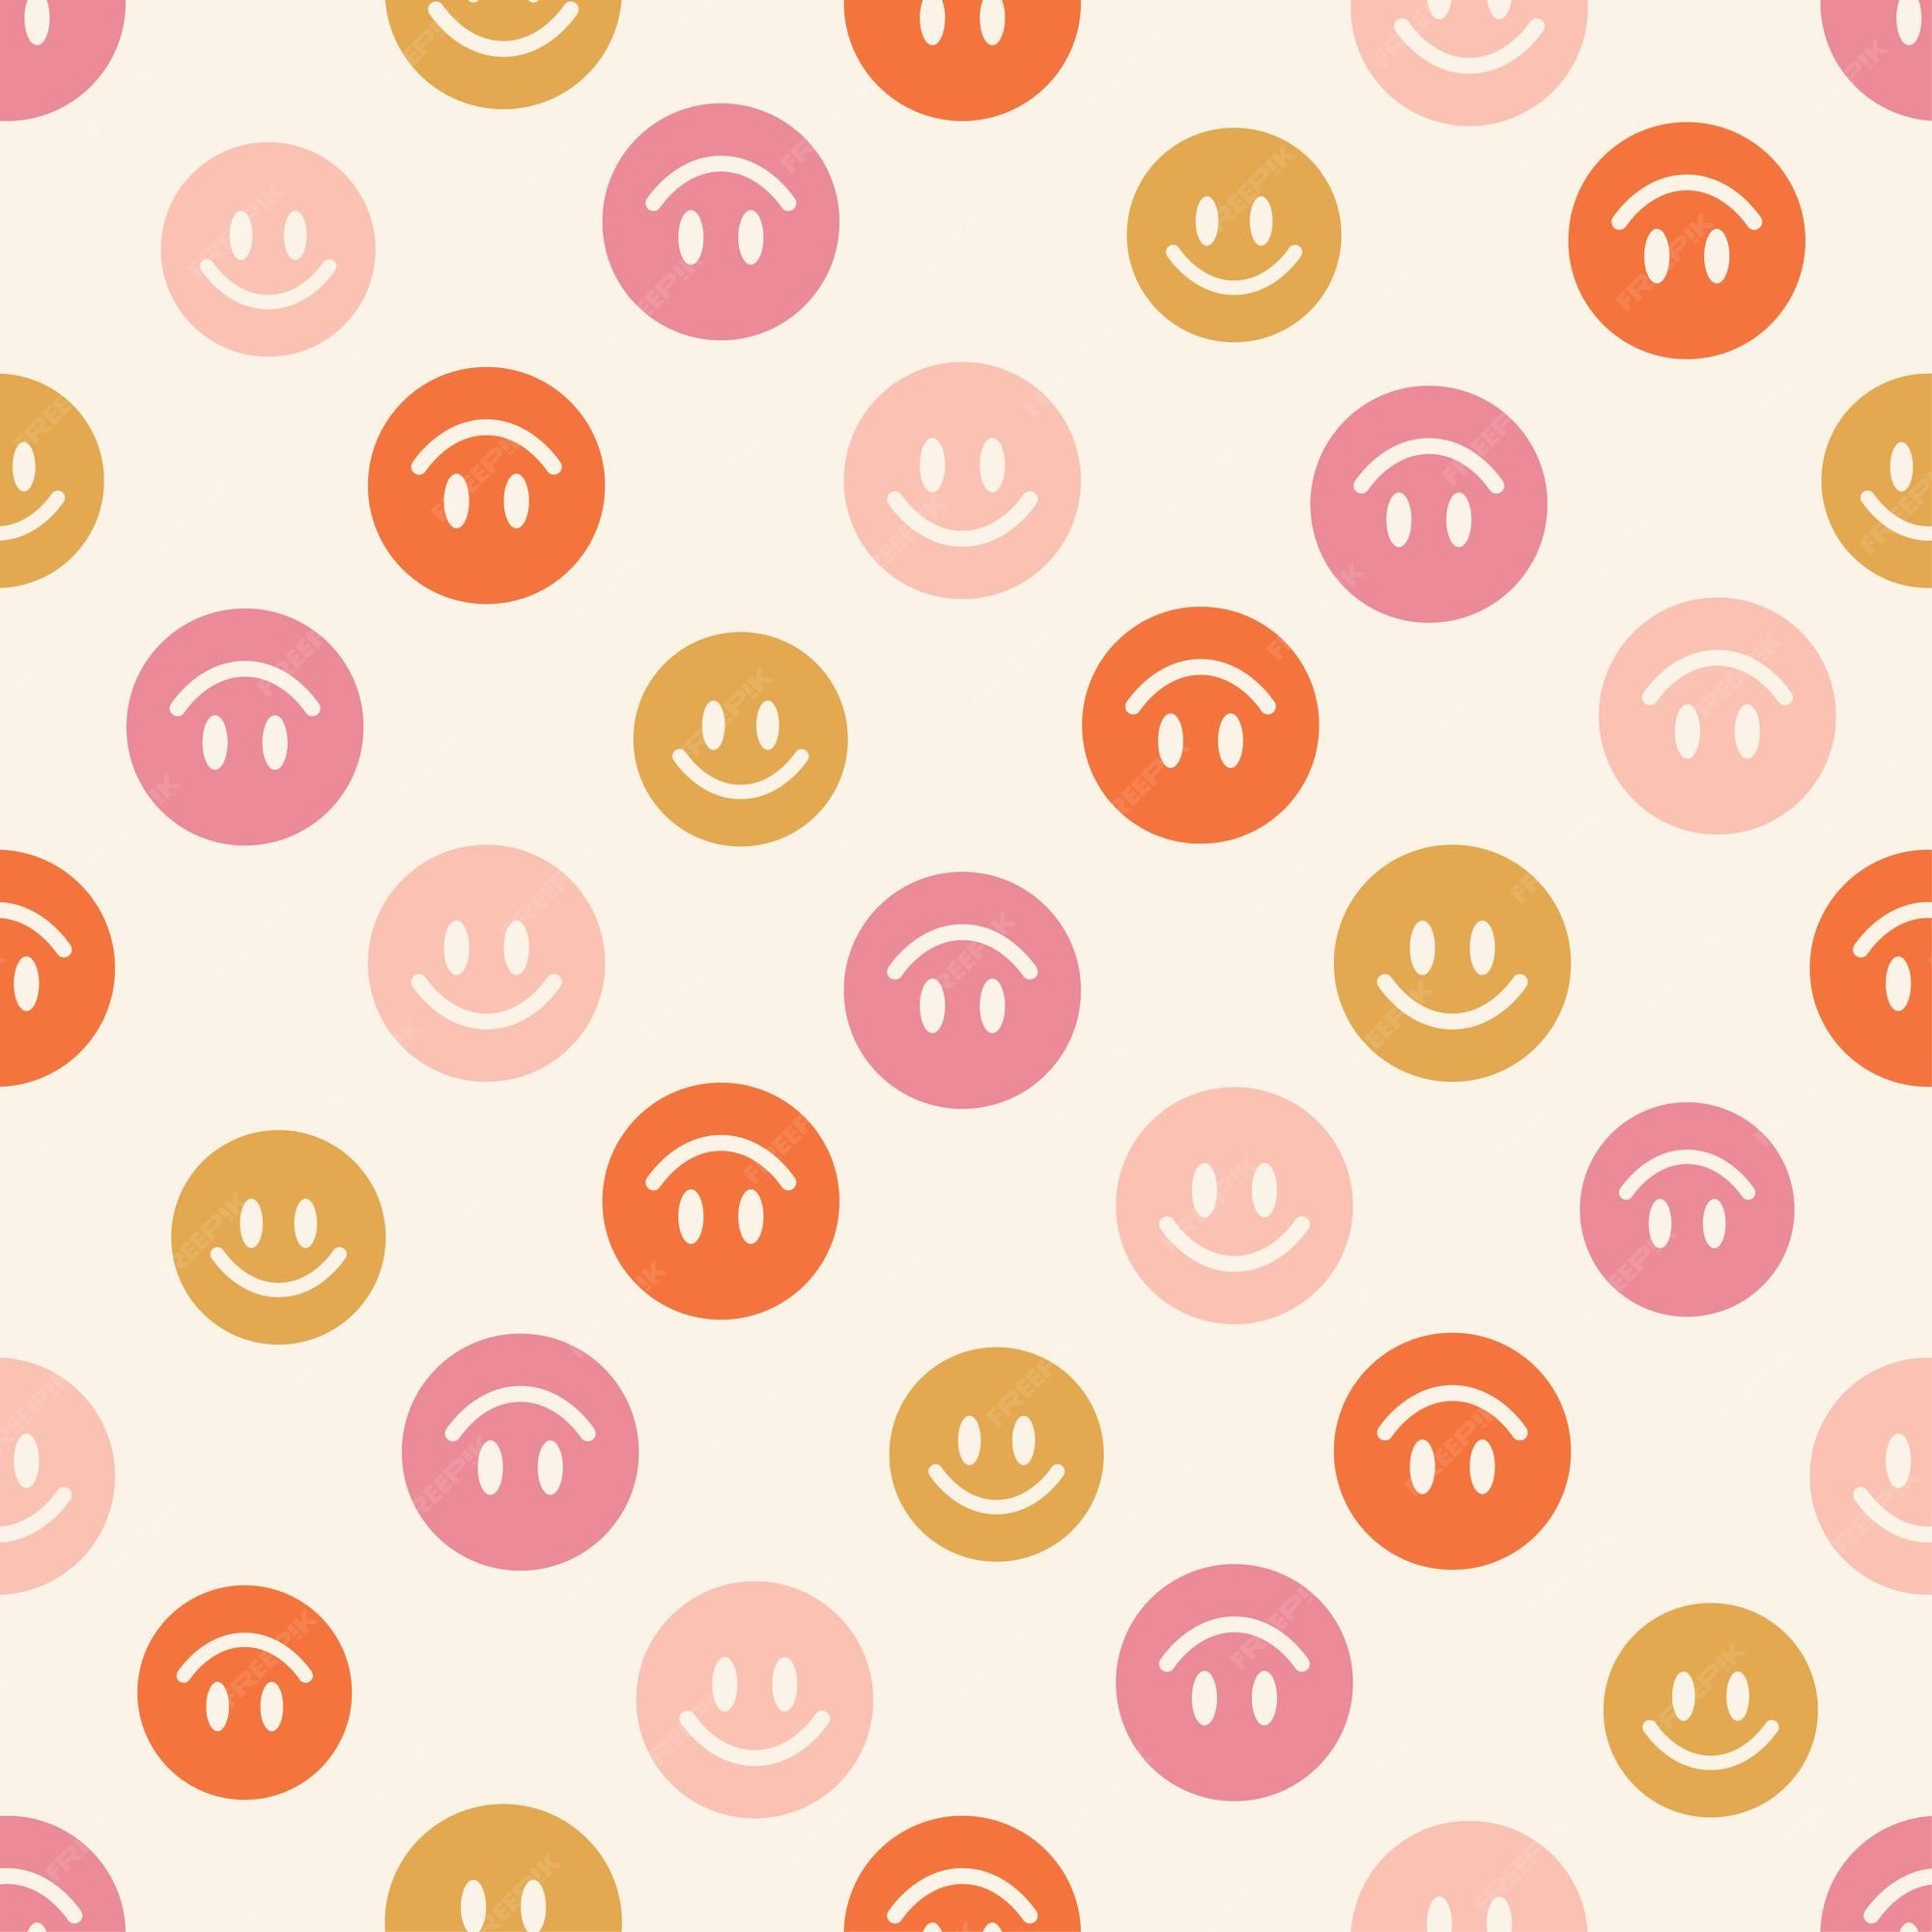 Premium Vector. Seamless pattern with hippie smiley faces